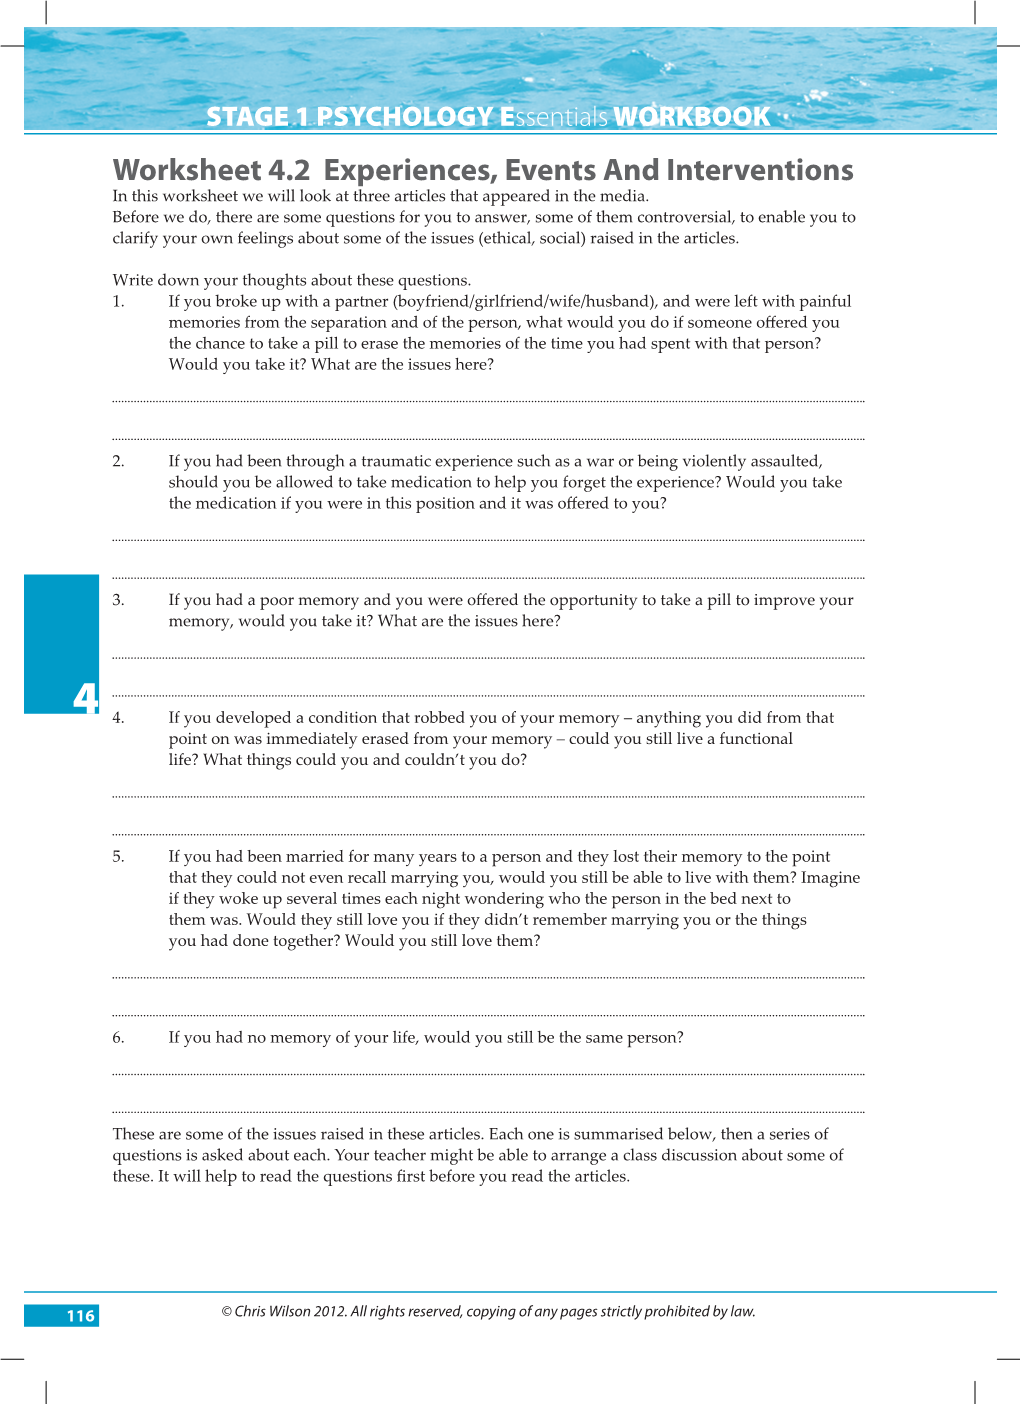 Worksheet 4.2 Experiences, Events and Interventions in This Worksheet We Will Look at Three Articles That Appeared in the Media